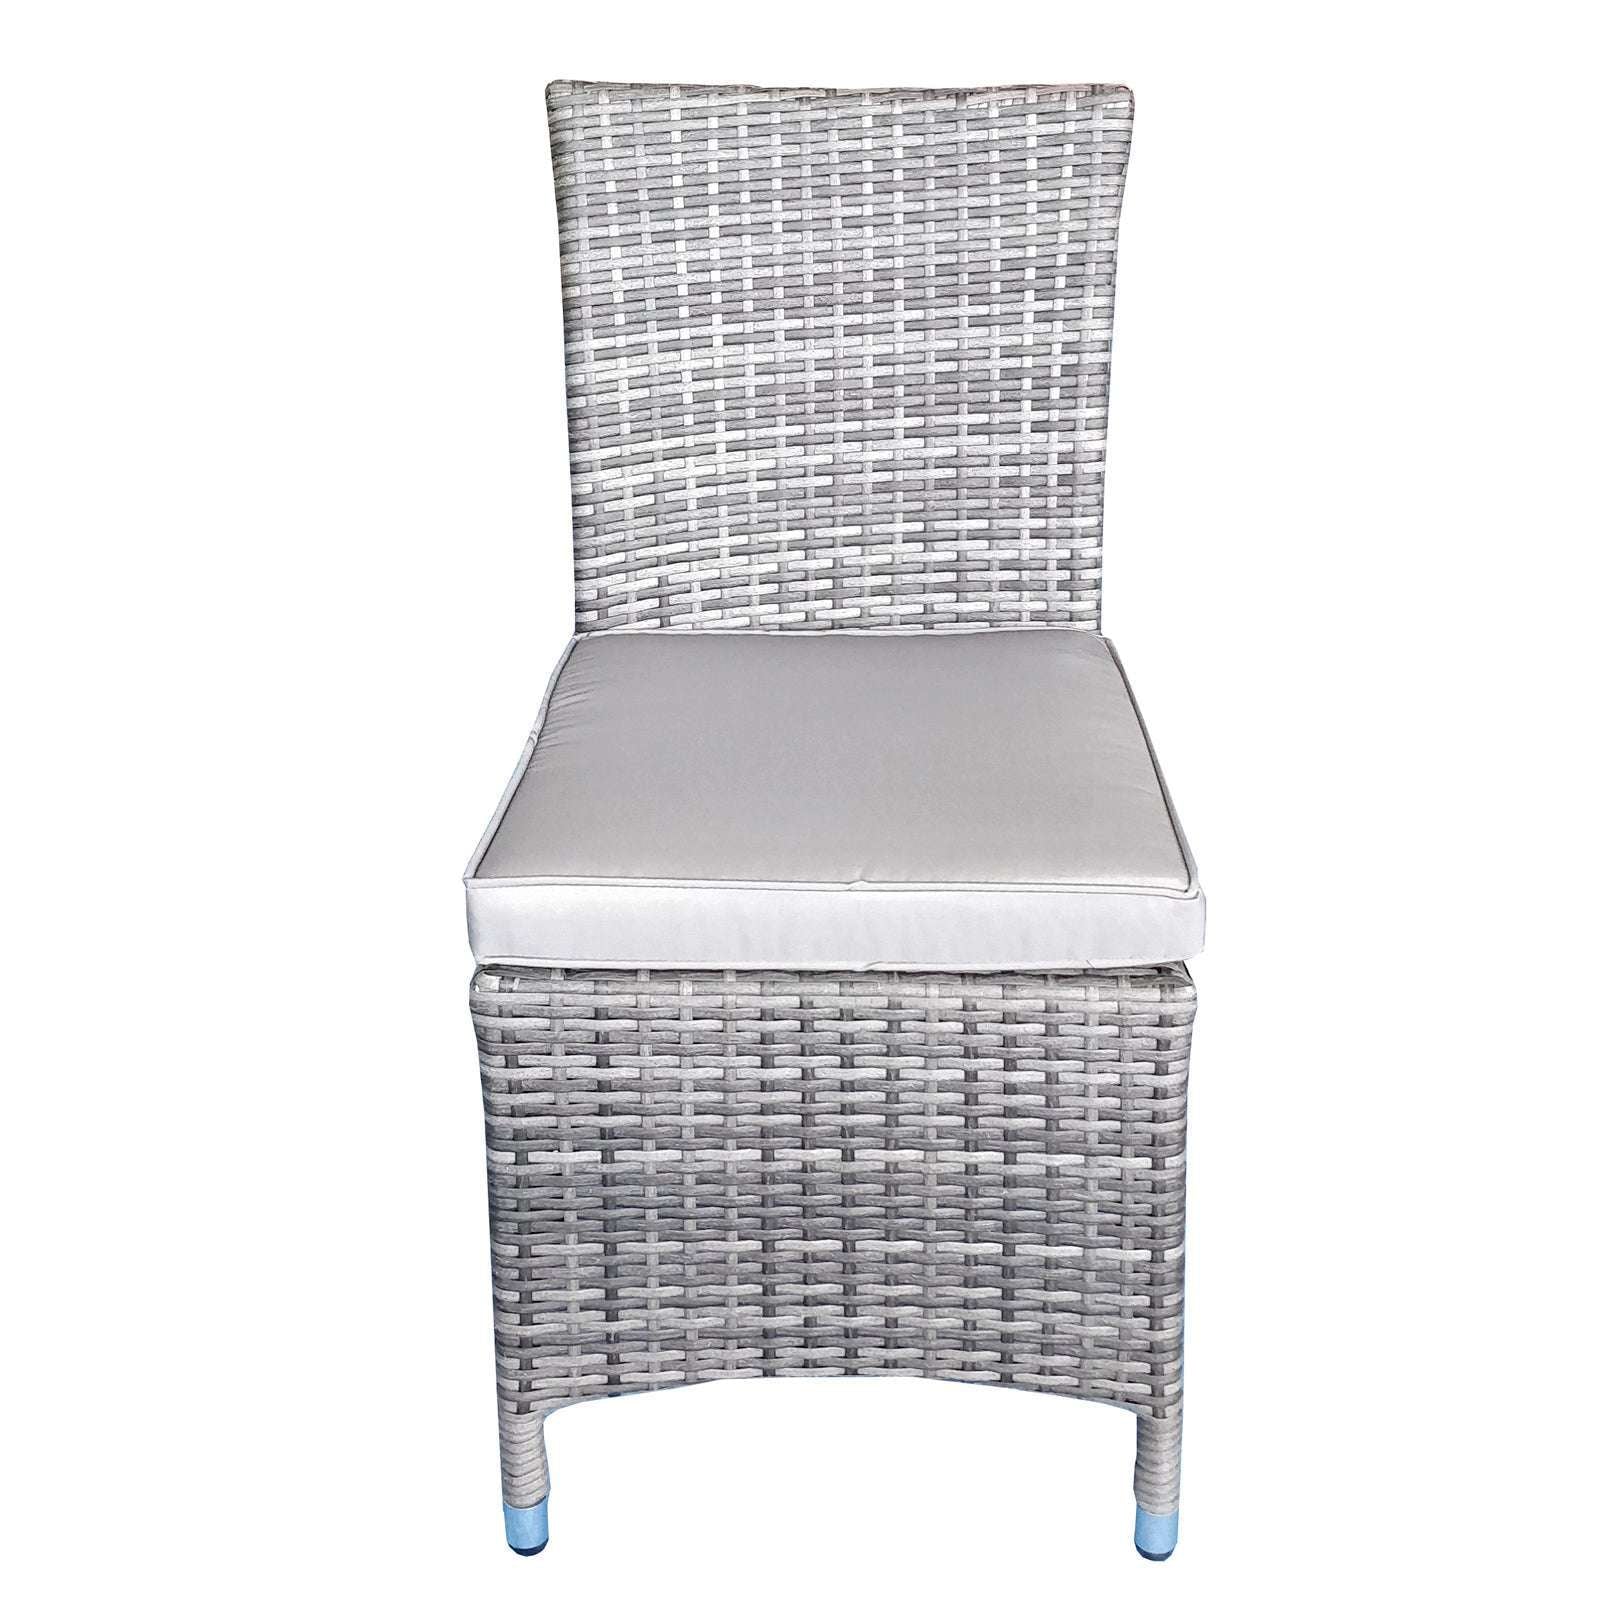 Exceptional Garden:Signature Weave Emily Armless Dining Chairs